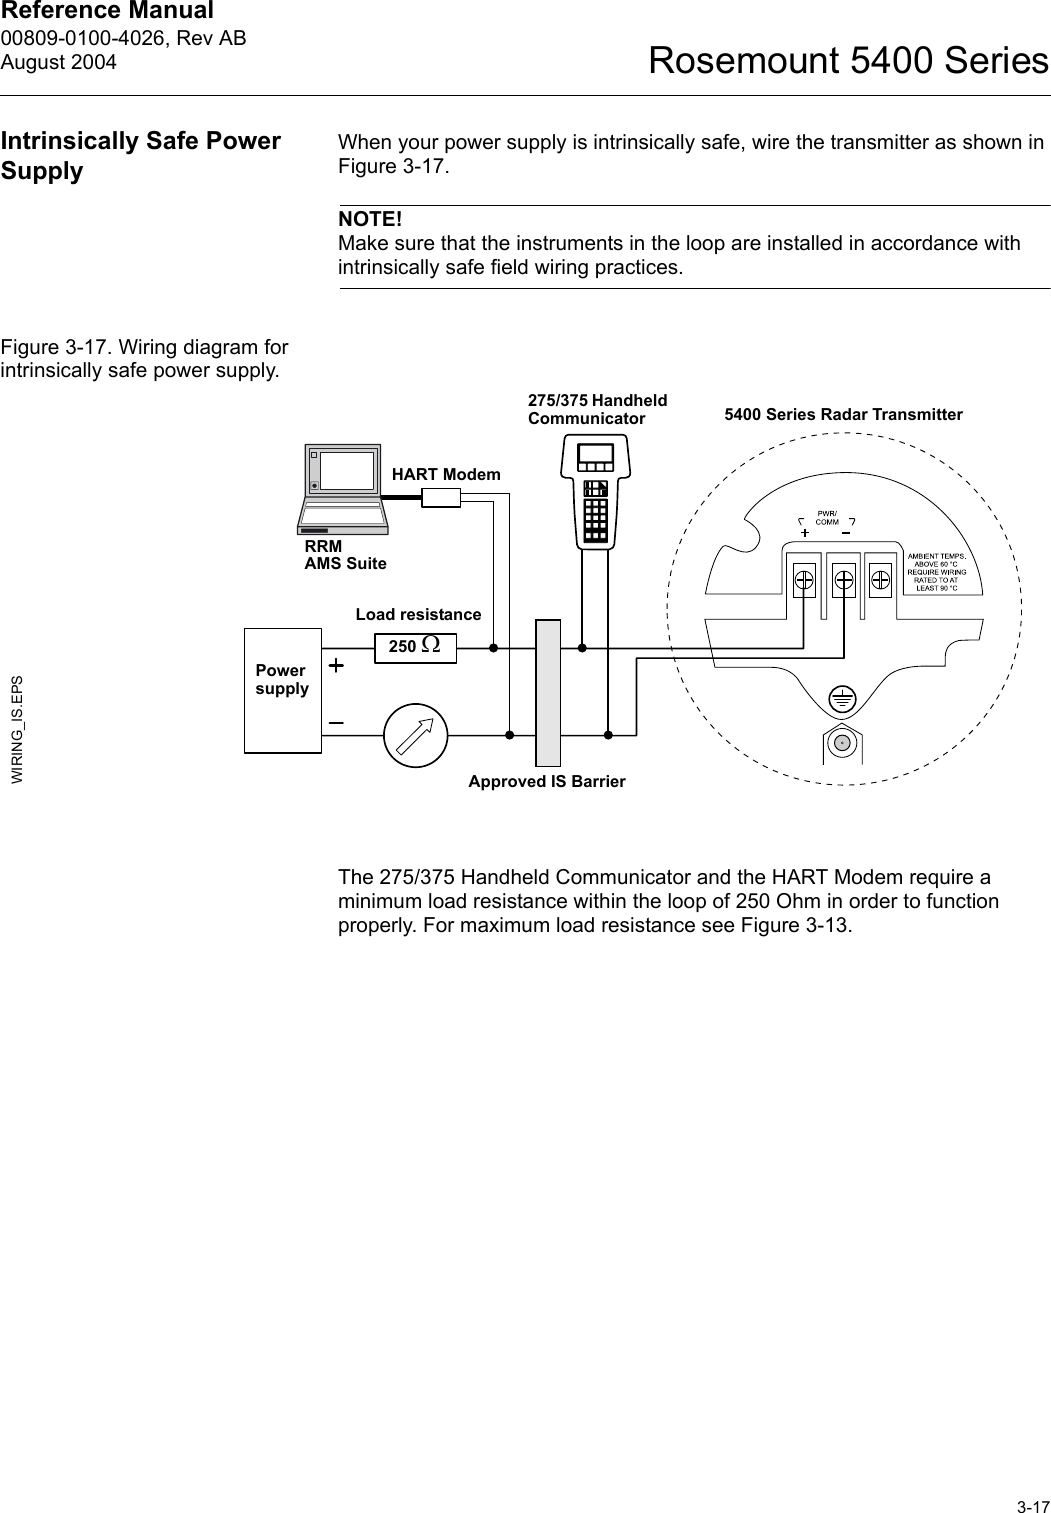 Reference Manual 00809-0100-4026, Rev ABAugust 20043-17Rosemount 5400 SeriesIntrinsically Safe Power SupplyWhen your power supply is intrinsically safe, wire the transmitter as shown in Figure 3-17.NOTE!Make sure that the instruments in the loop are installed in accordance with intrinsically safe field wiring practices.Figure 3-17. Wiring diagram for intrinsically safe power supply.The 275/375 Handheld Communicator and the HART Modem require a minimum load resistance within the loop of 250 Ohm in order to function properly. For maximum load resistance see Figure 3-13. Power supplyWIRING_IS.EPS275/375 Handheld CommunicatorHART Modem5400 Series Radar TransmitterApproved IS BarrierLoad resistance 250 ΩRRMAMS Suite